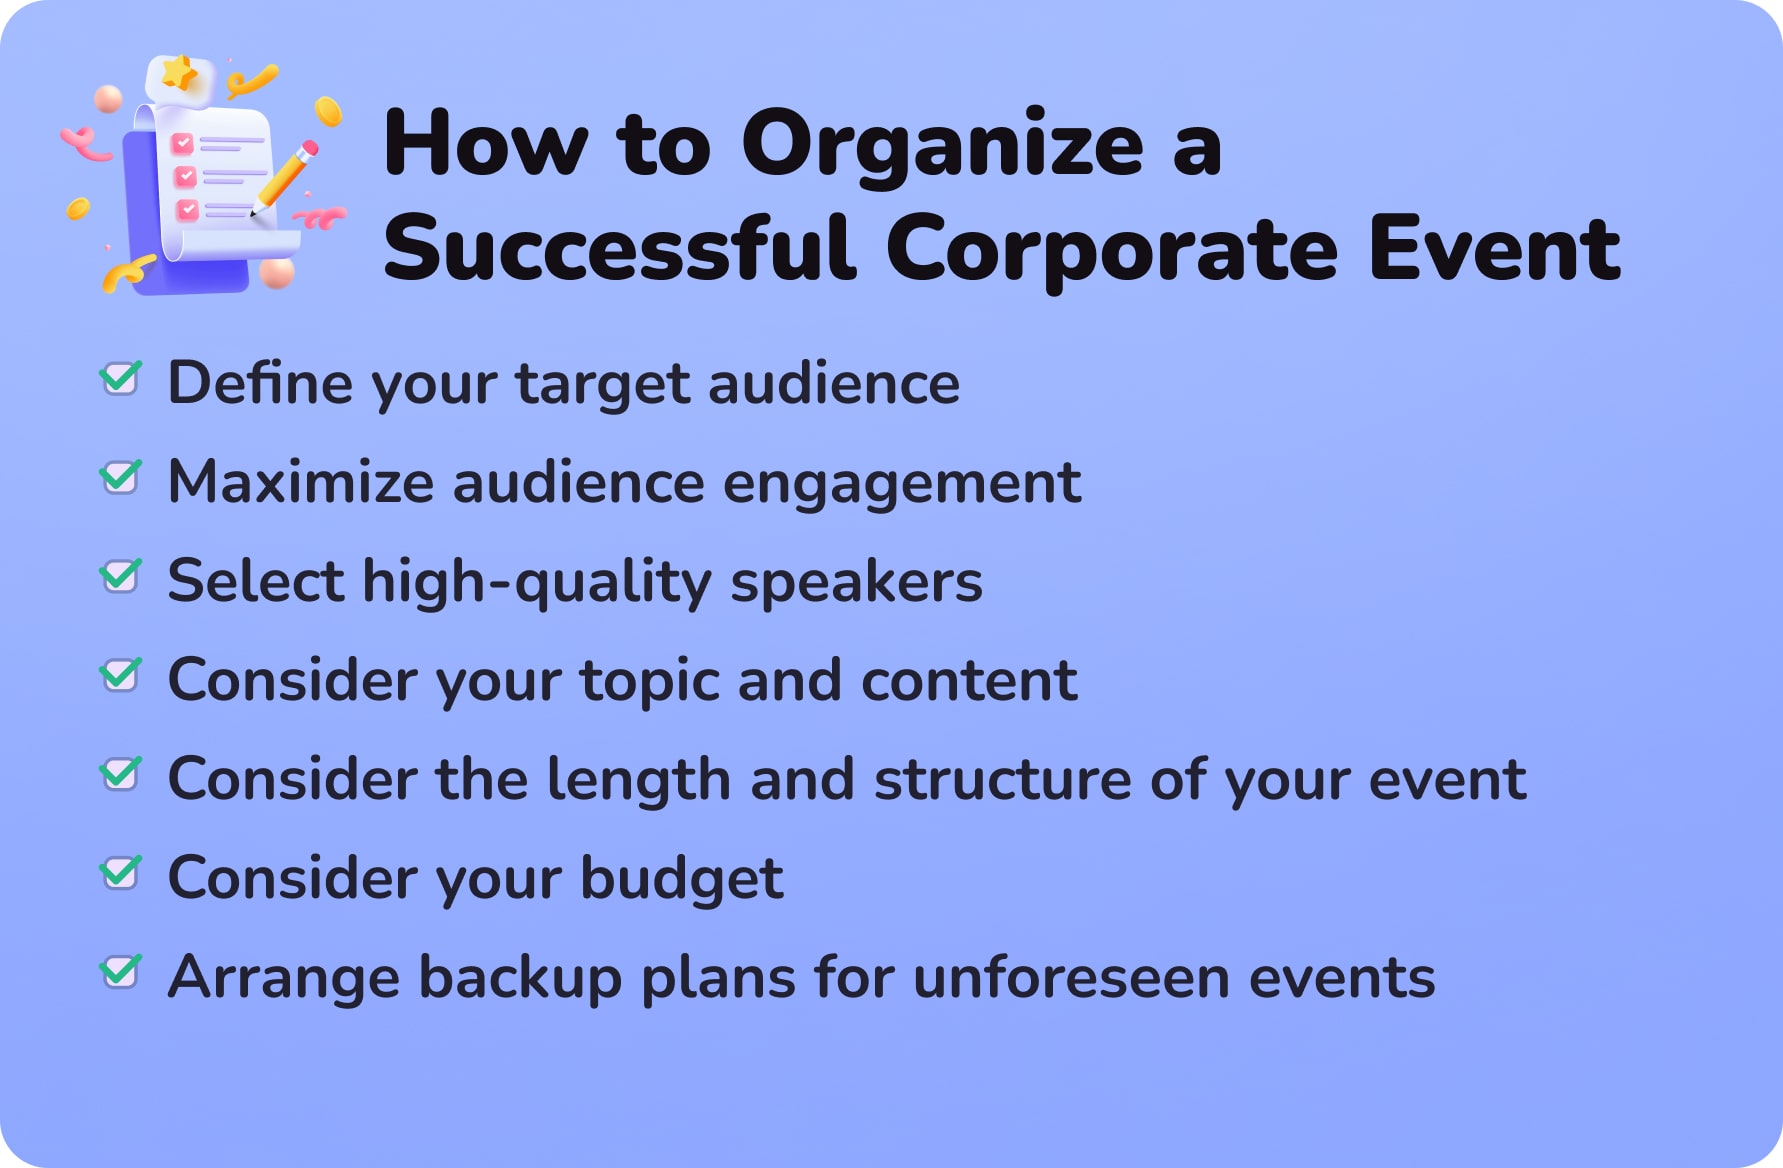 How to Organize a Successful Corporate Event